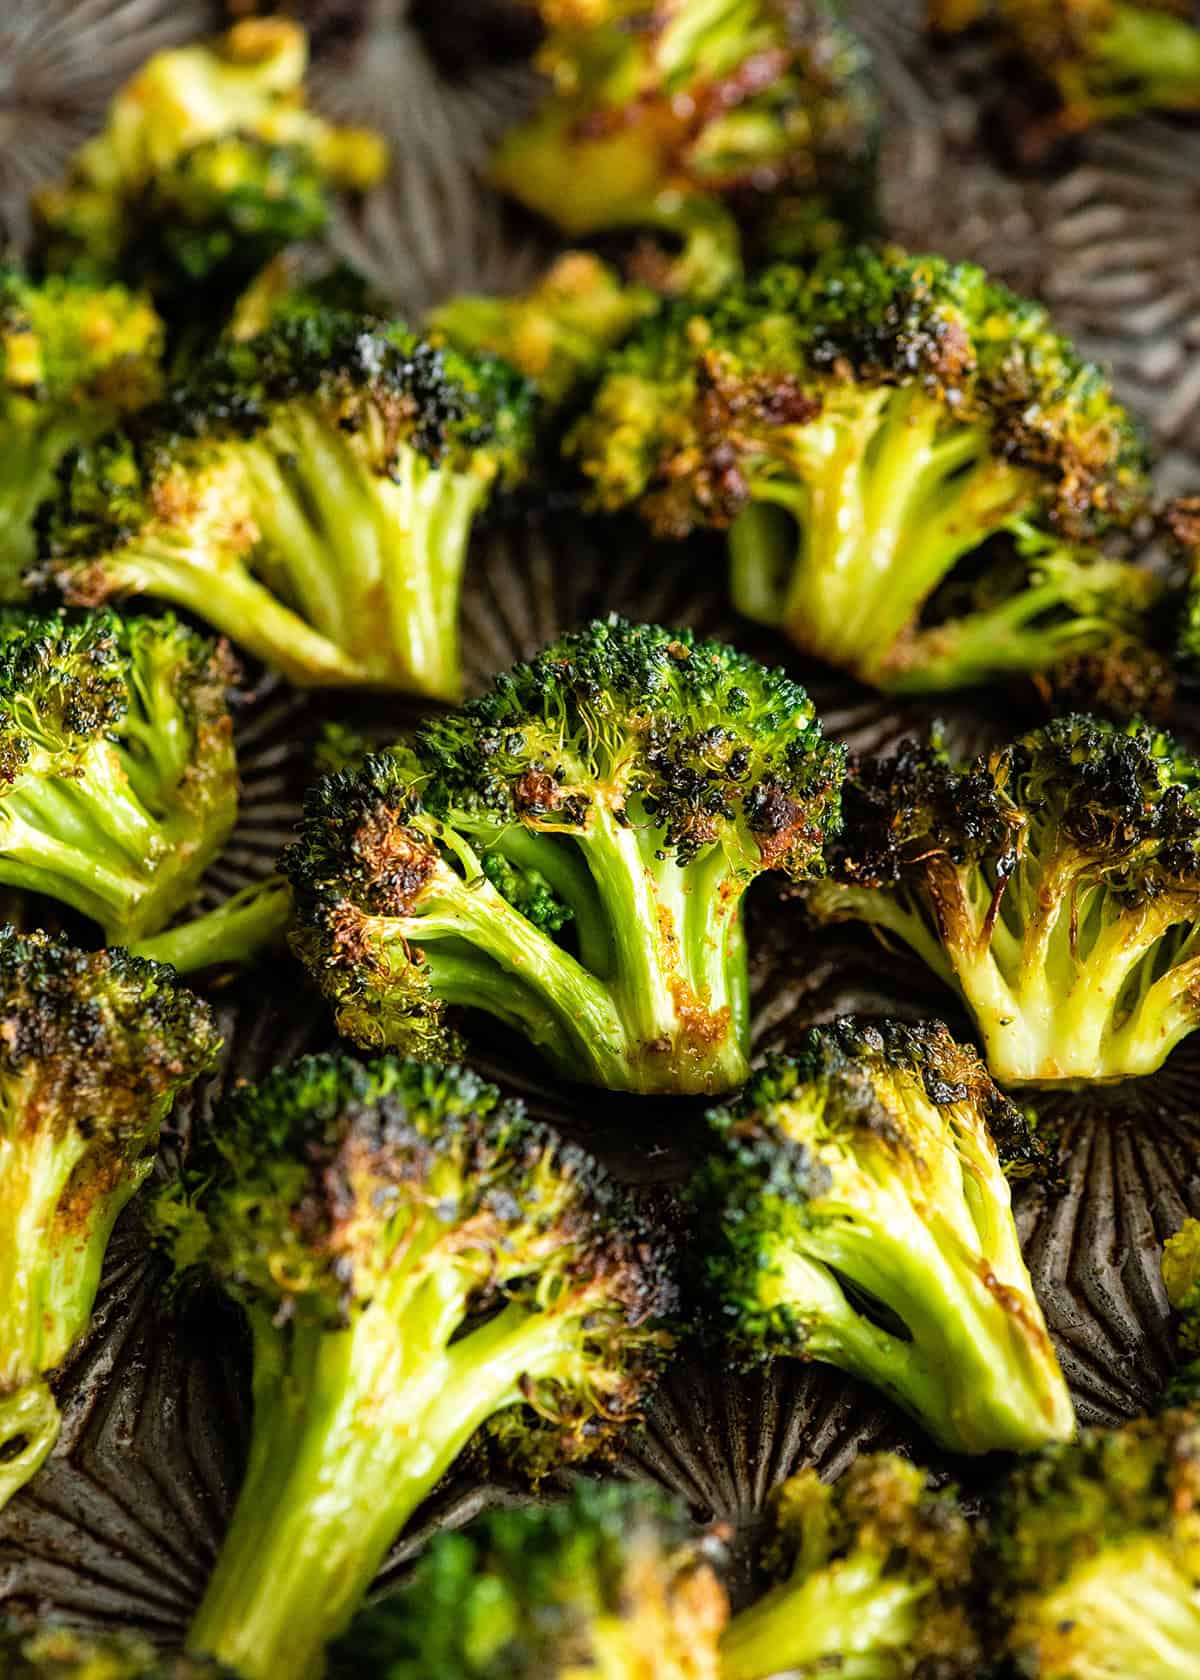 how to roast broccoli in the oven - broccoli on a baking sheet after roasting